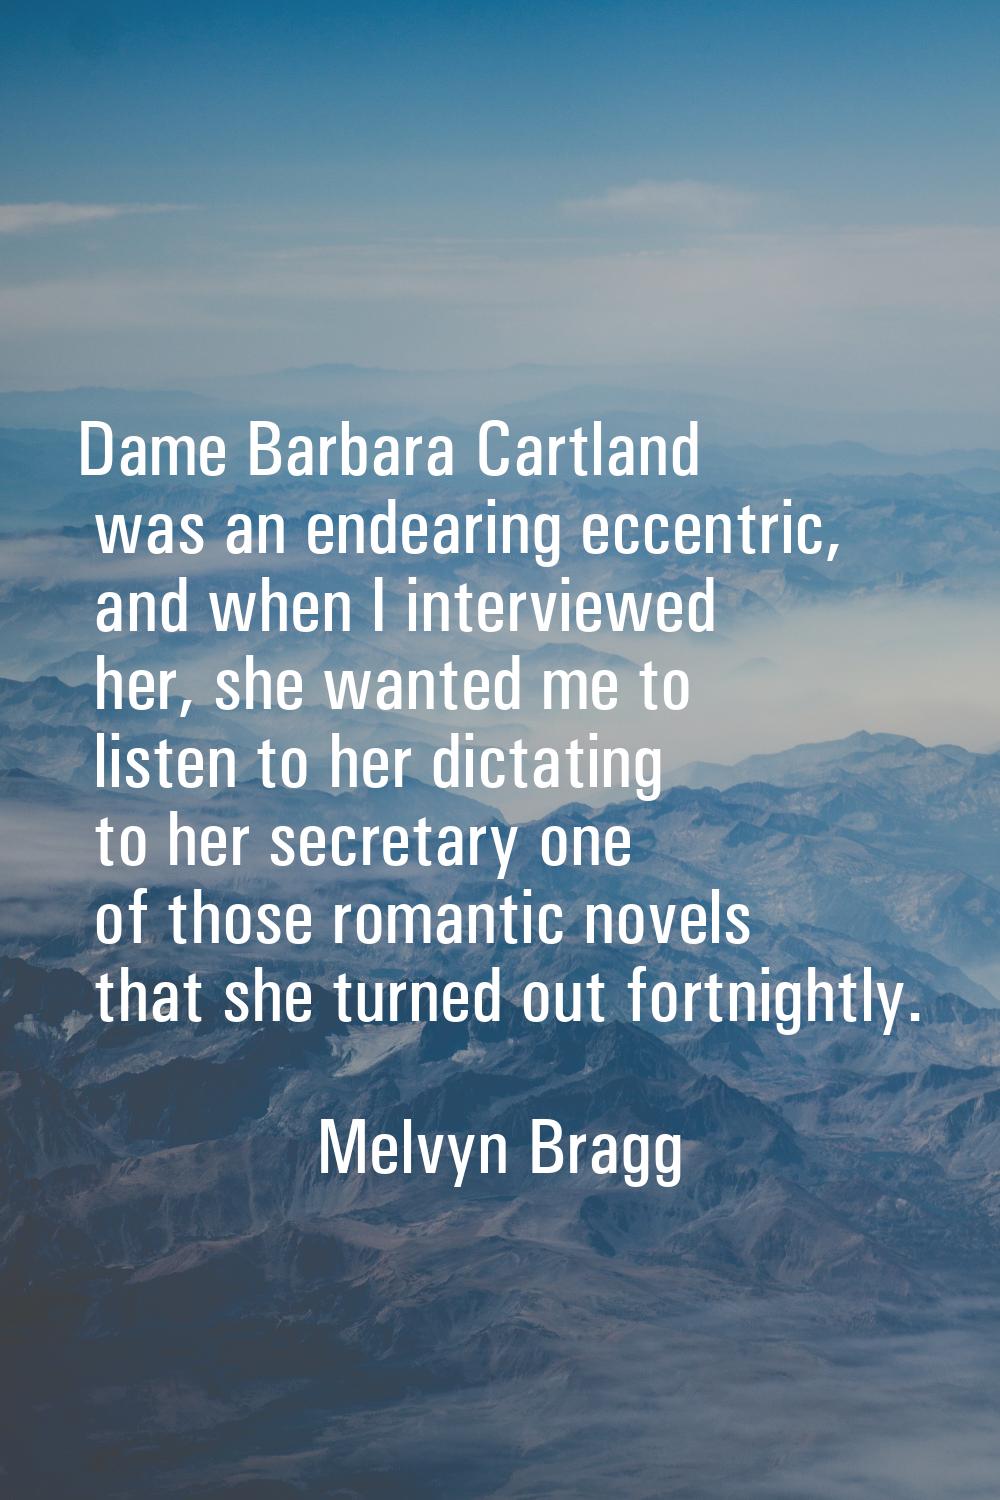 Dame Barbara Cartland was an endearing eccentric, and when I interviewed her, she wanted me to list